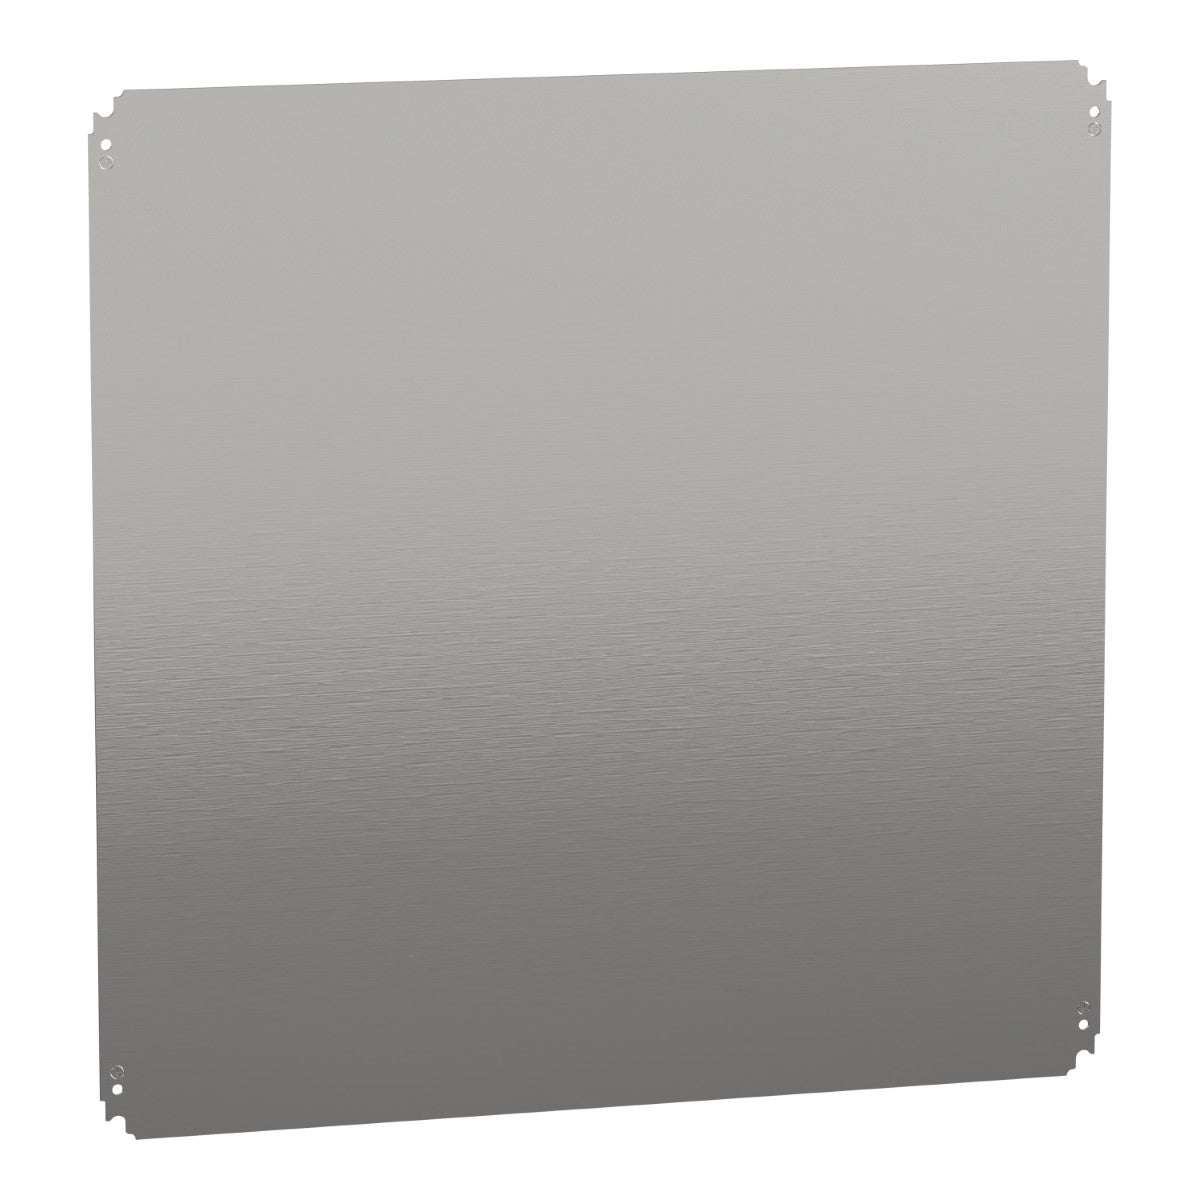 Plain mounting plate H800xW800mm made of galvanised sheet steel